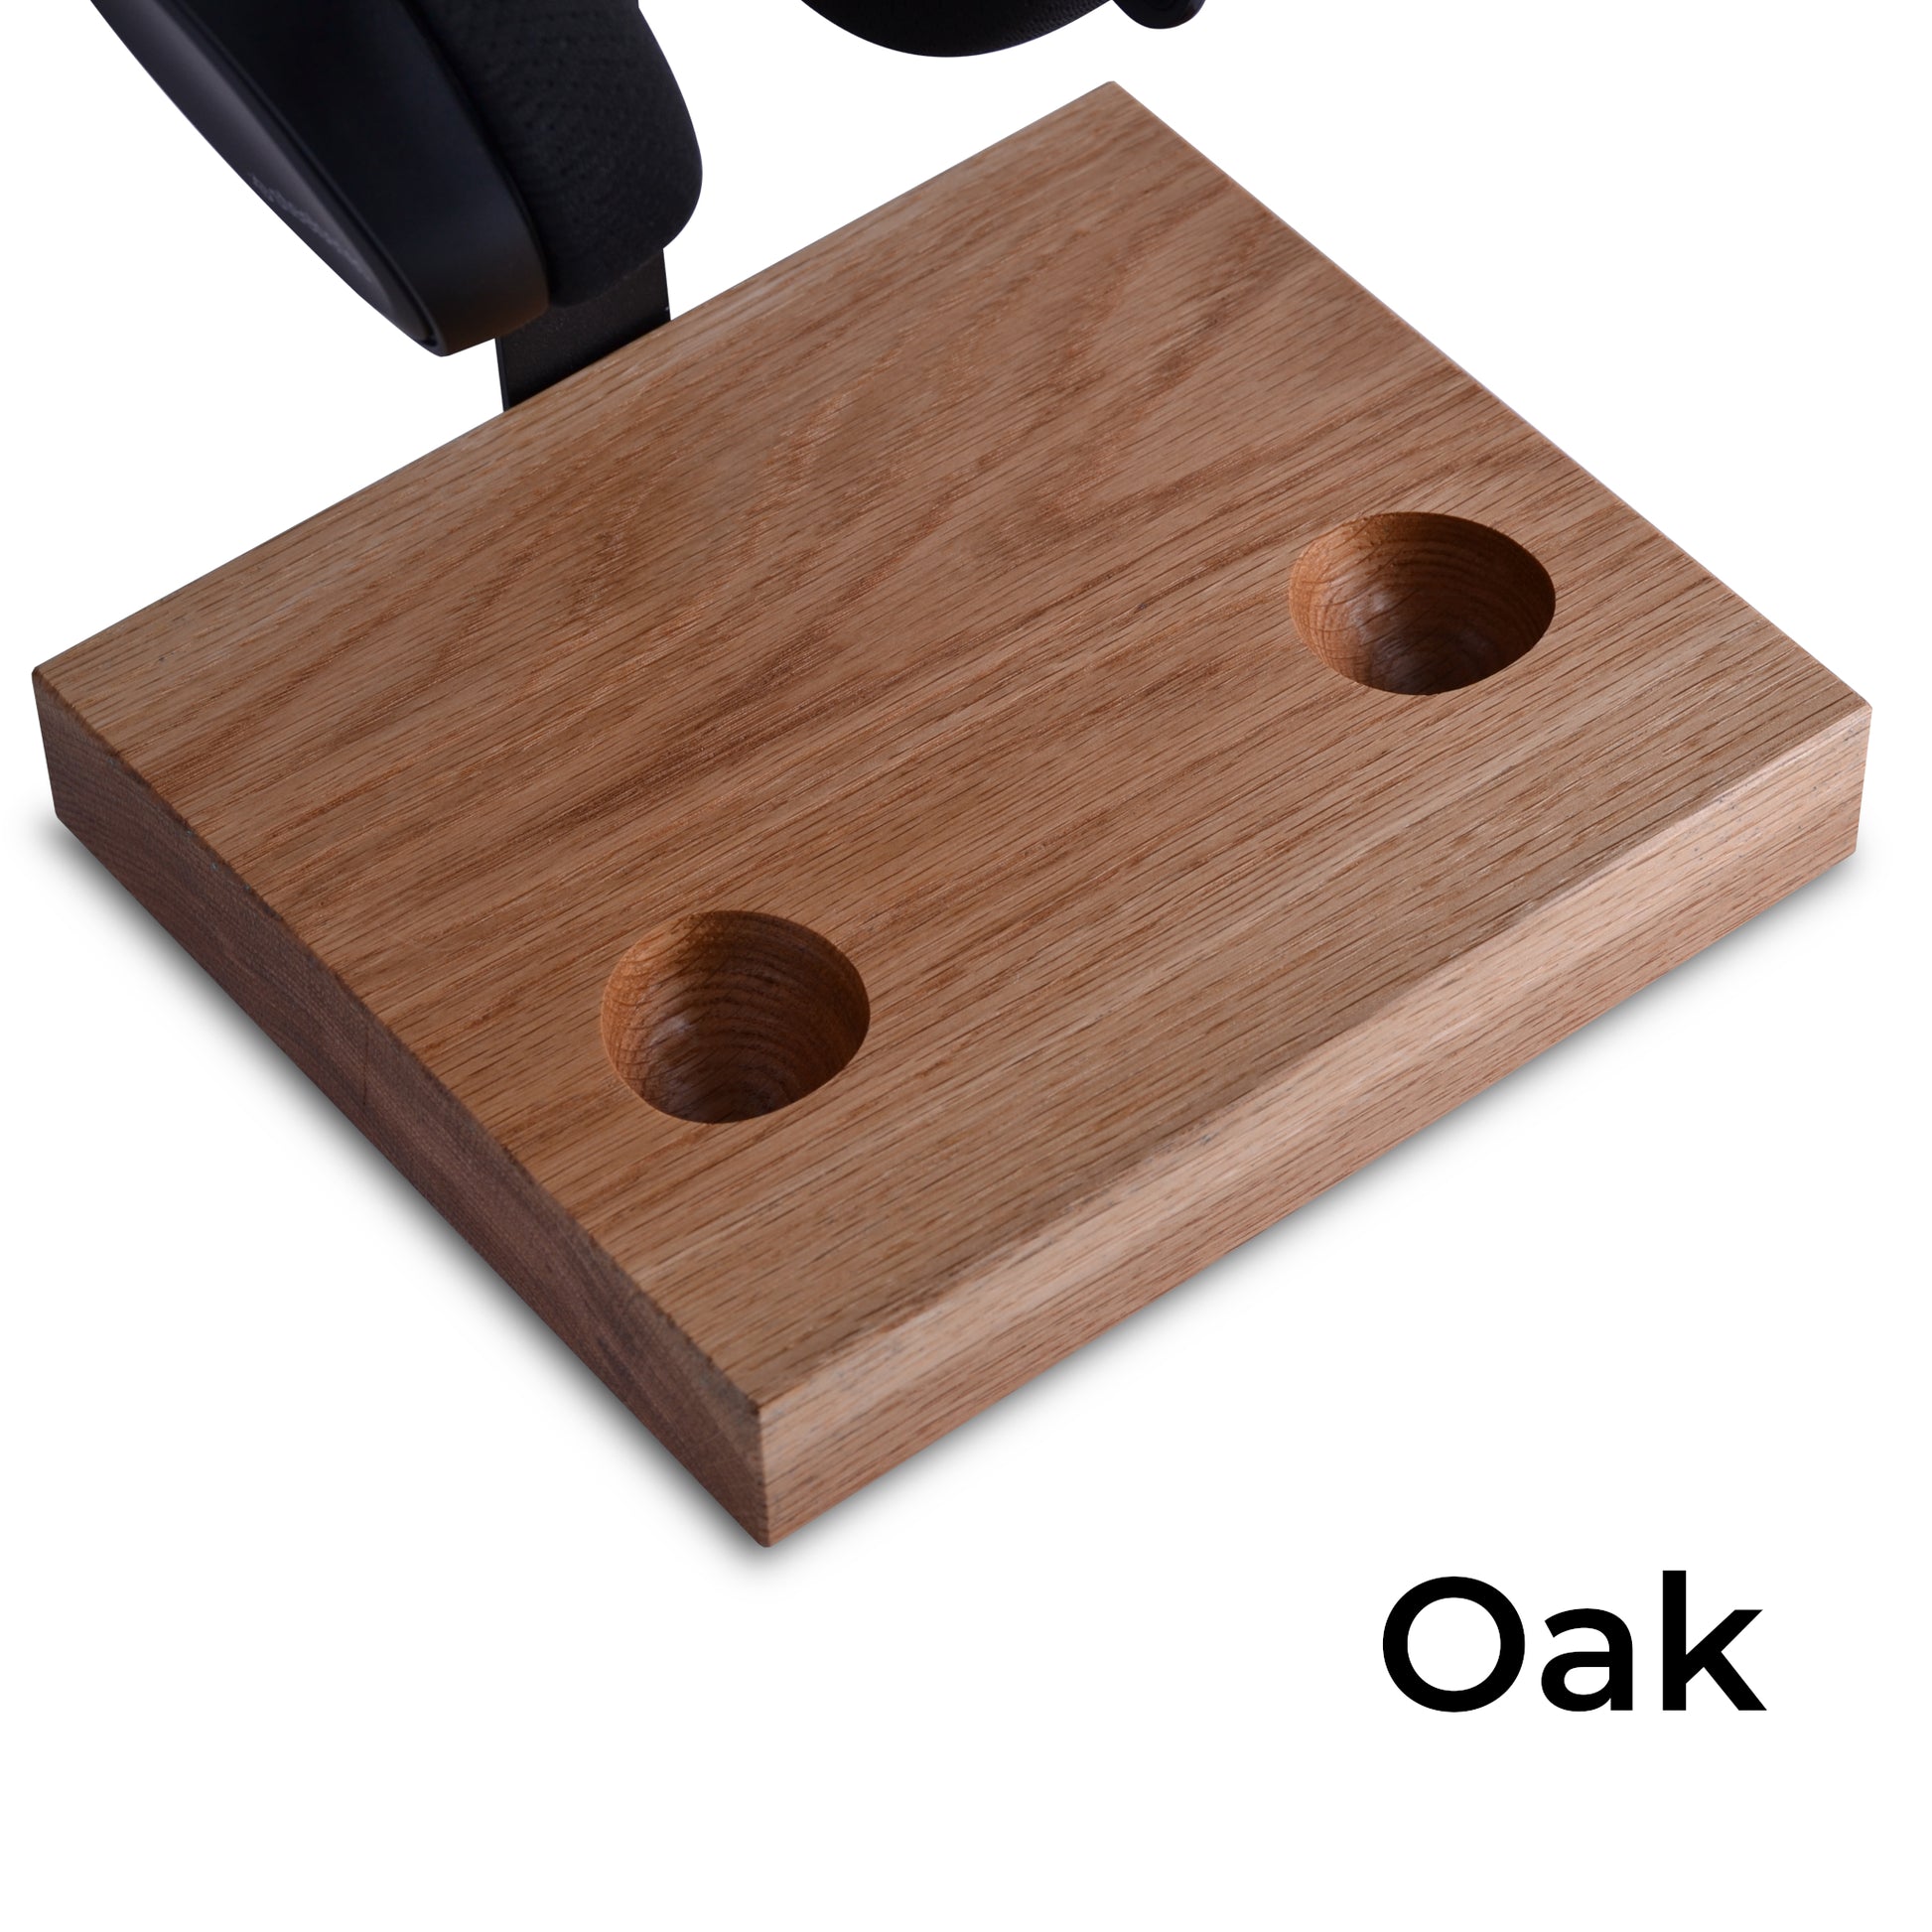 Oak version of headset and controller stand for Xbox series X|S Controller